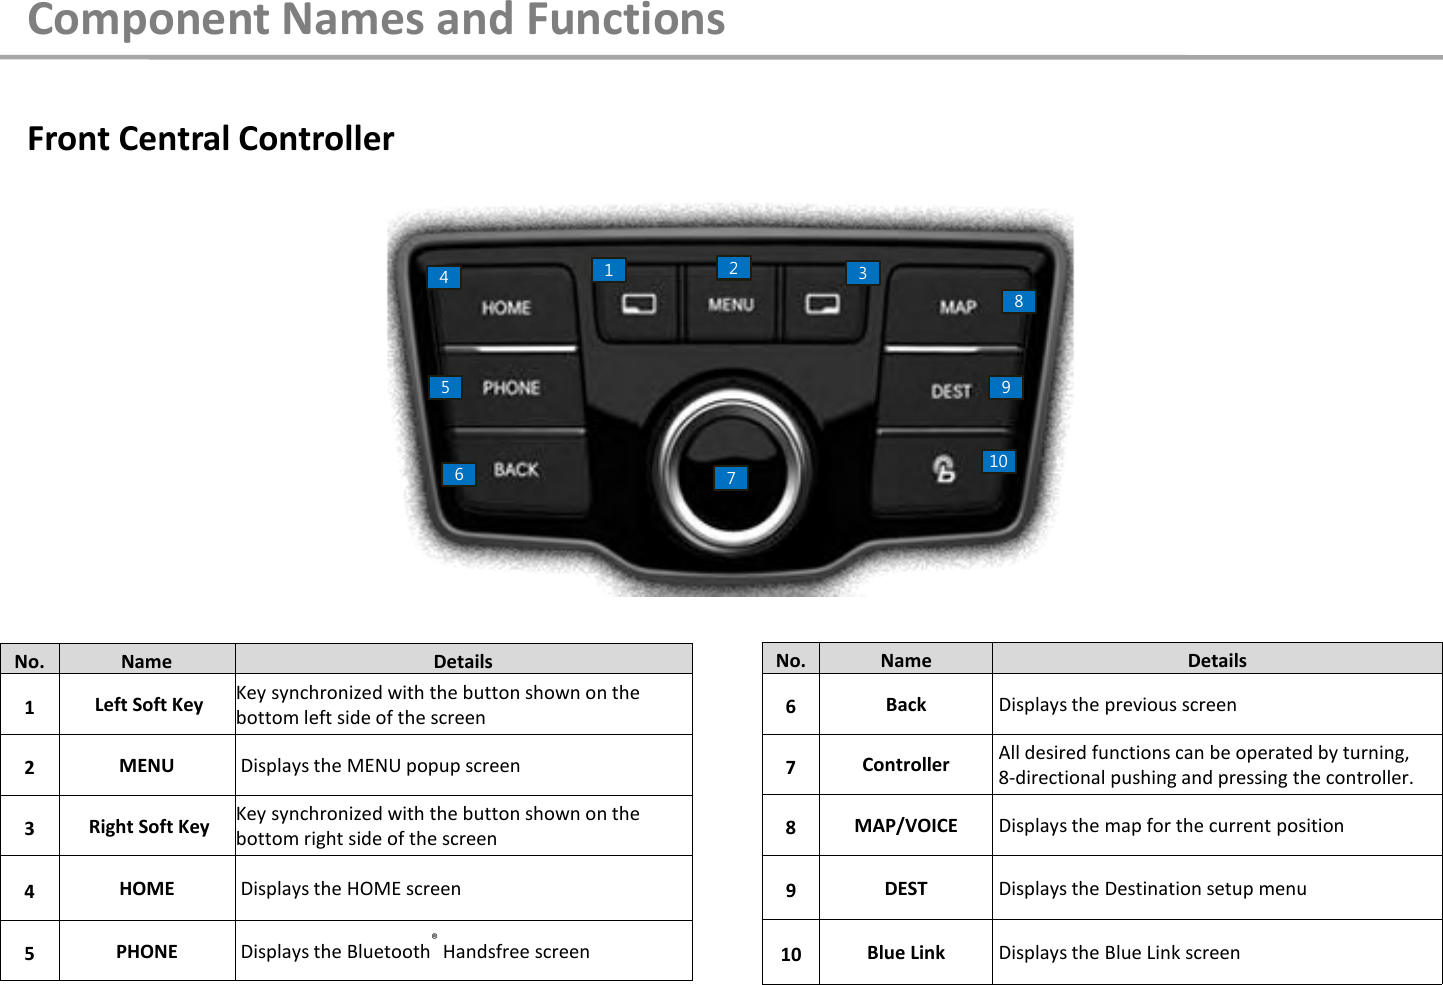 Front Central Controller No.  Name  Details 1   Left Soft Key  Key synchronized with the button shown on the bottom left side of the screen 2  MENU   Displays the MENU popup screen   3   Right Soft Key  Key synchronized with the button shown on the bottom right side of the screen 4  HOME   Displays the HOME screen 5  PHONE   Displays the Bluetooth® Handsfree screen No.  Name  Details 6  Back   Displays the previous screen 7  Controller   All desired functions can be operated by turning,   8-directional pushing and pressing the controller. 8  MAP/VOICE   Displays the map for the current position 9  DEST   Displays the Destination setup menu 10 Blue Link   Displays the Blue Link screen Component Names and Functions 4 9 1 5 2 6 3 10 7 8 